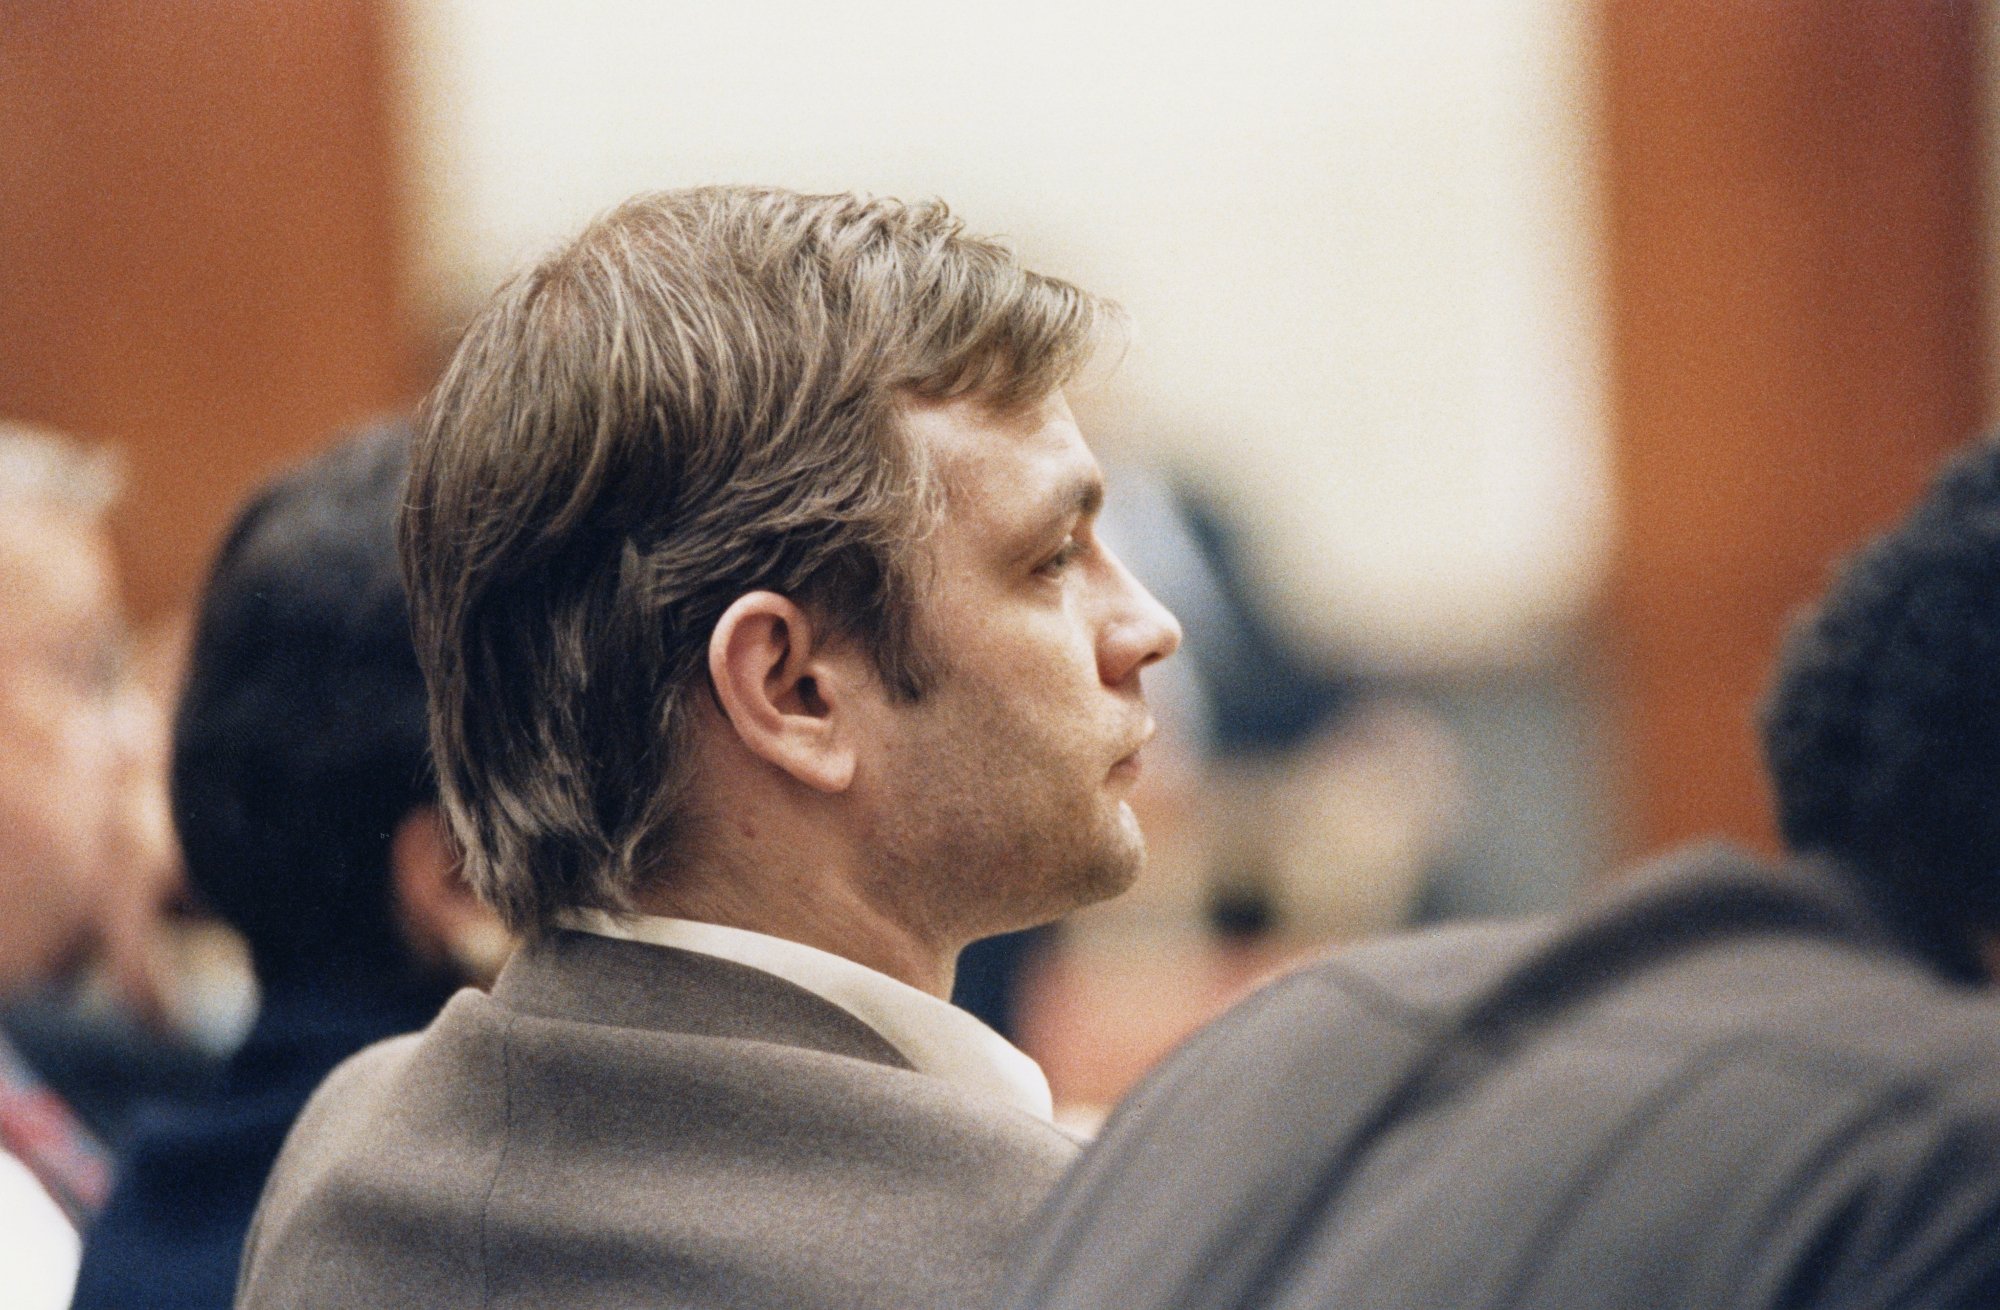 Jeffrey Dahmer, whose victims' families argued over auction of his property. He's wearing a grey suit jacket and looking ahead away from the camera at his trial in a courtroom.